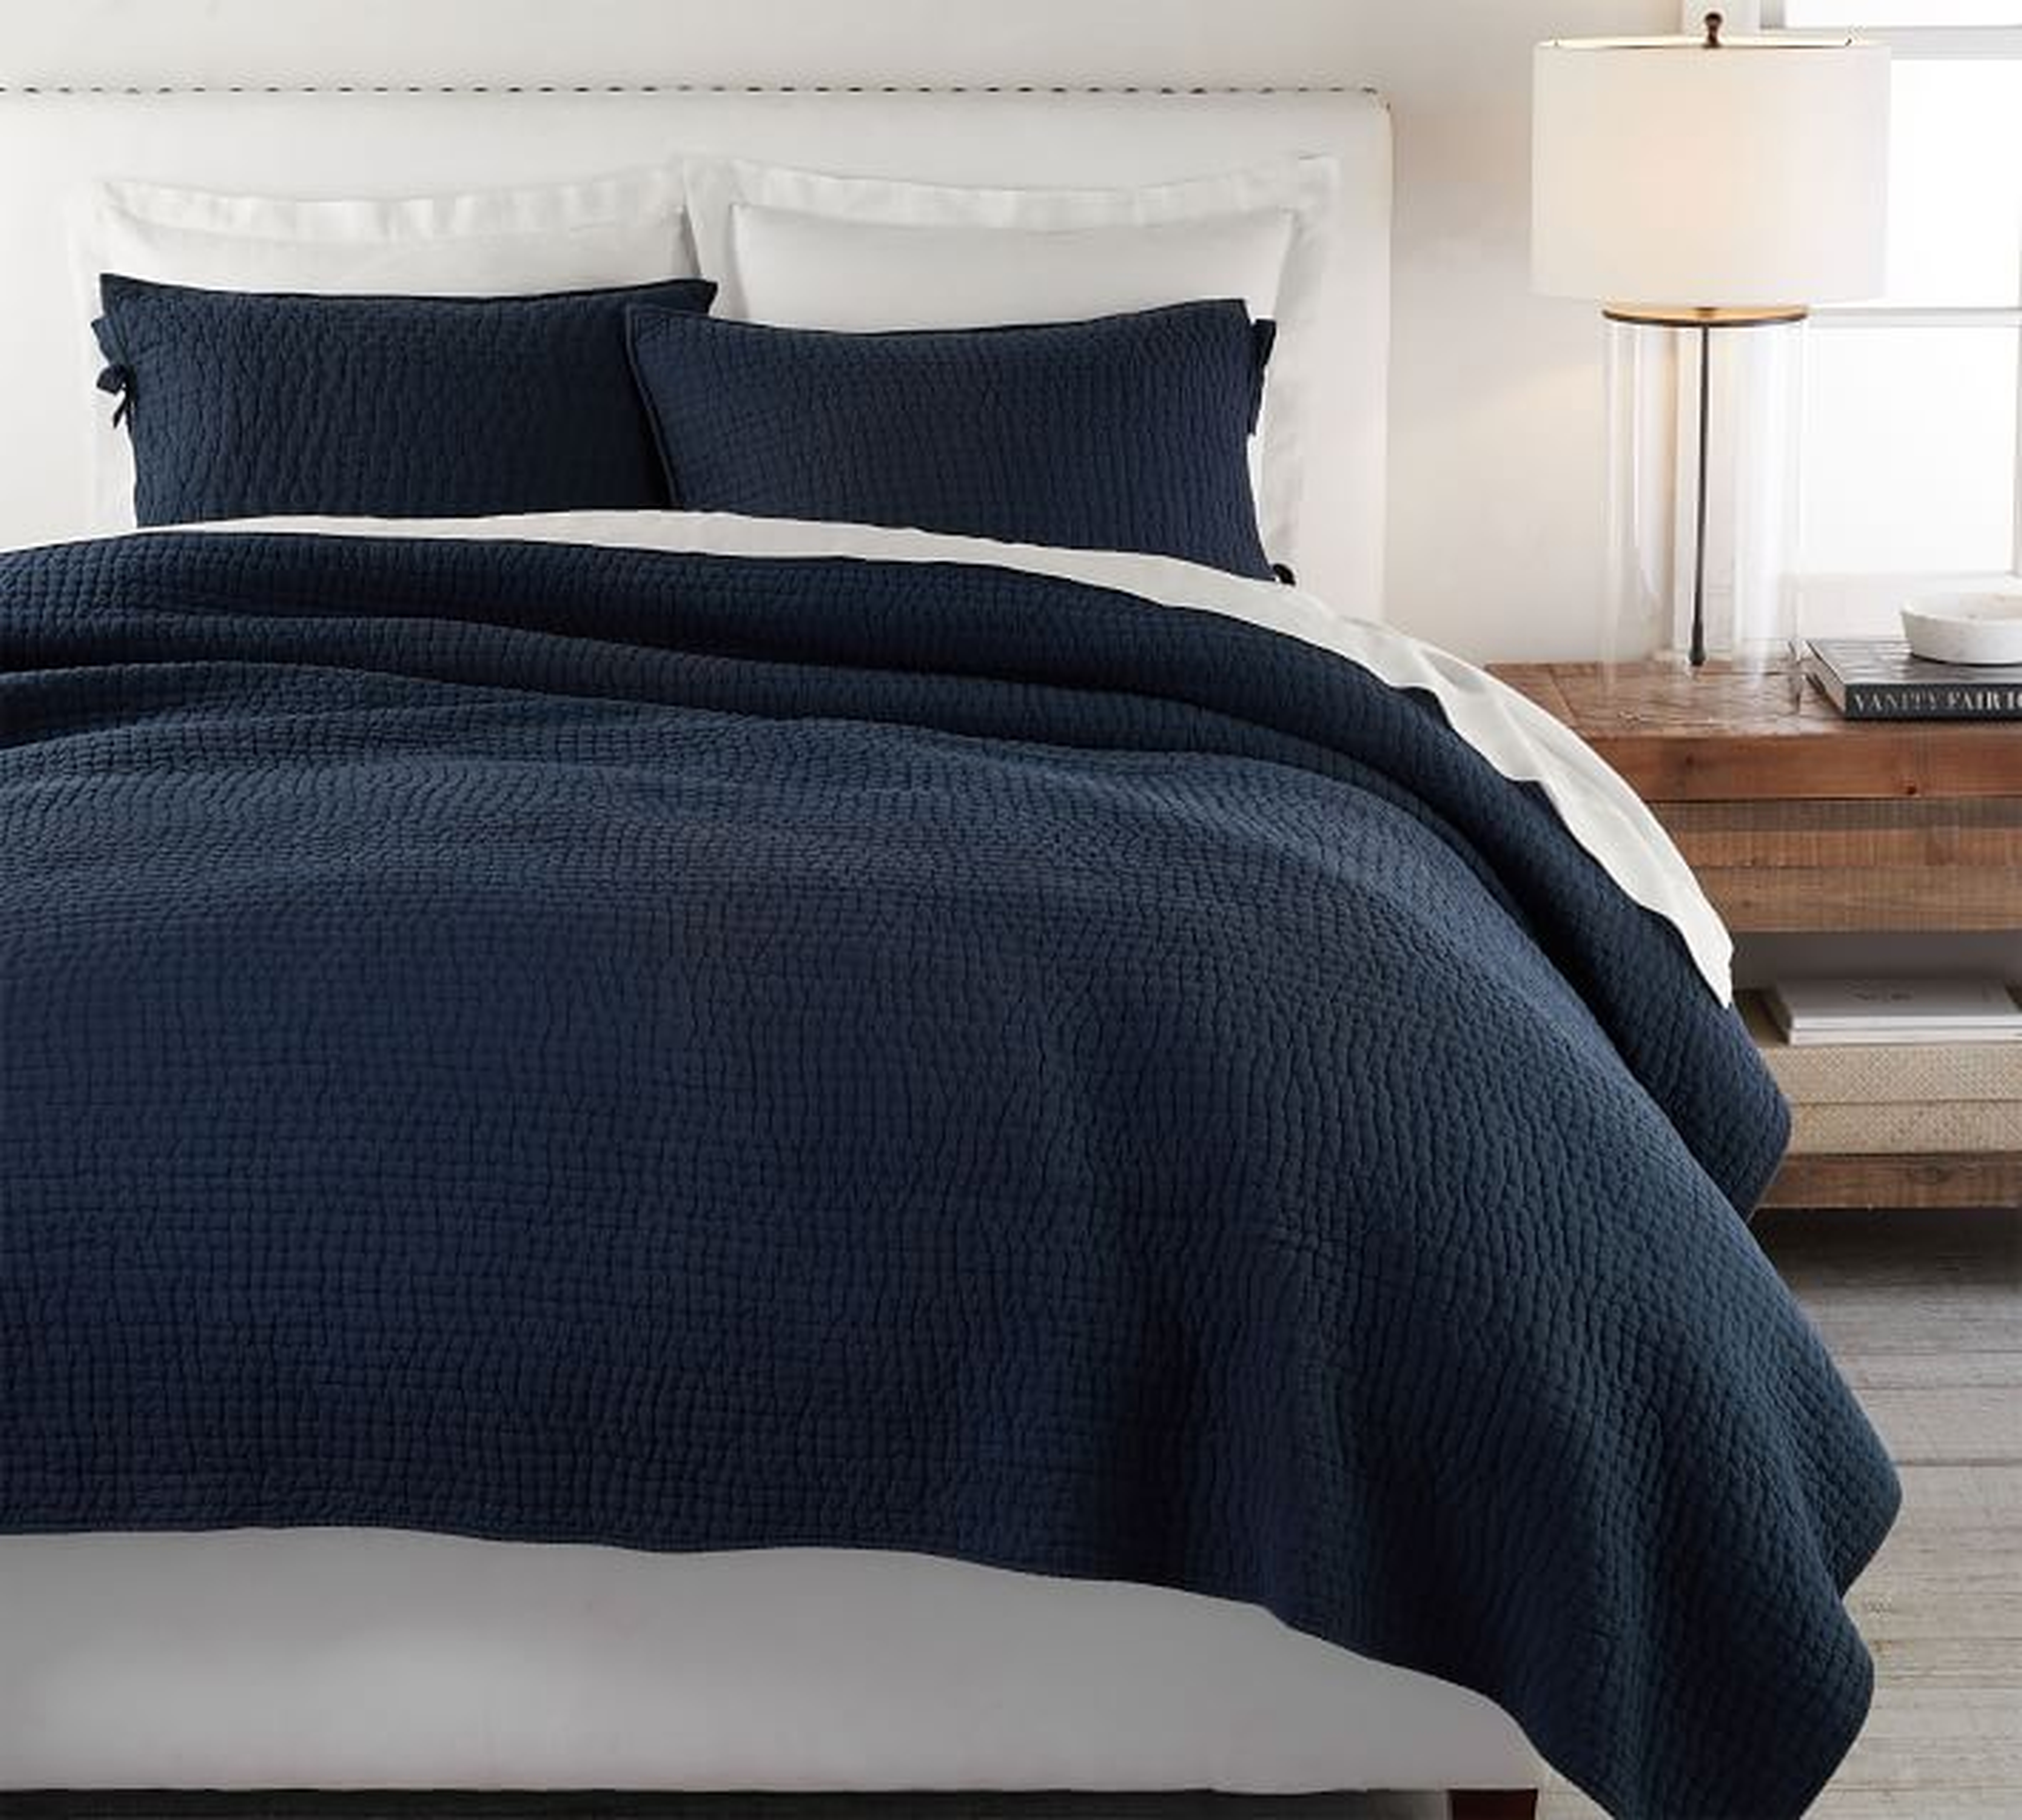 Pick-Stitch Handcrafted Cotton/Linen Quilt, King/Cal. King, Midnight Blue - Pottery Barn